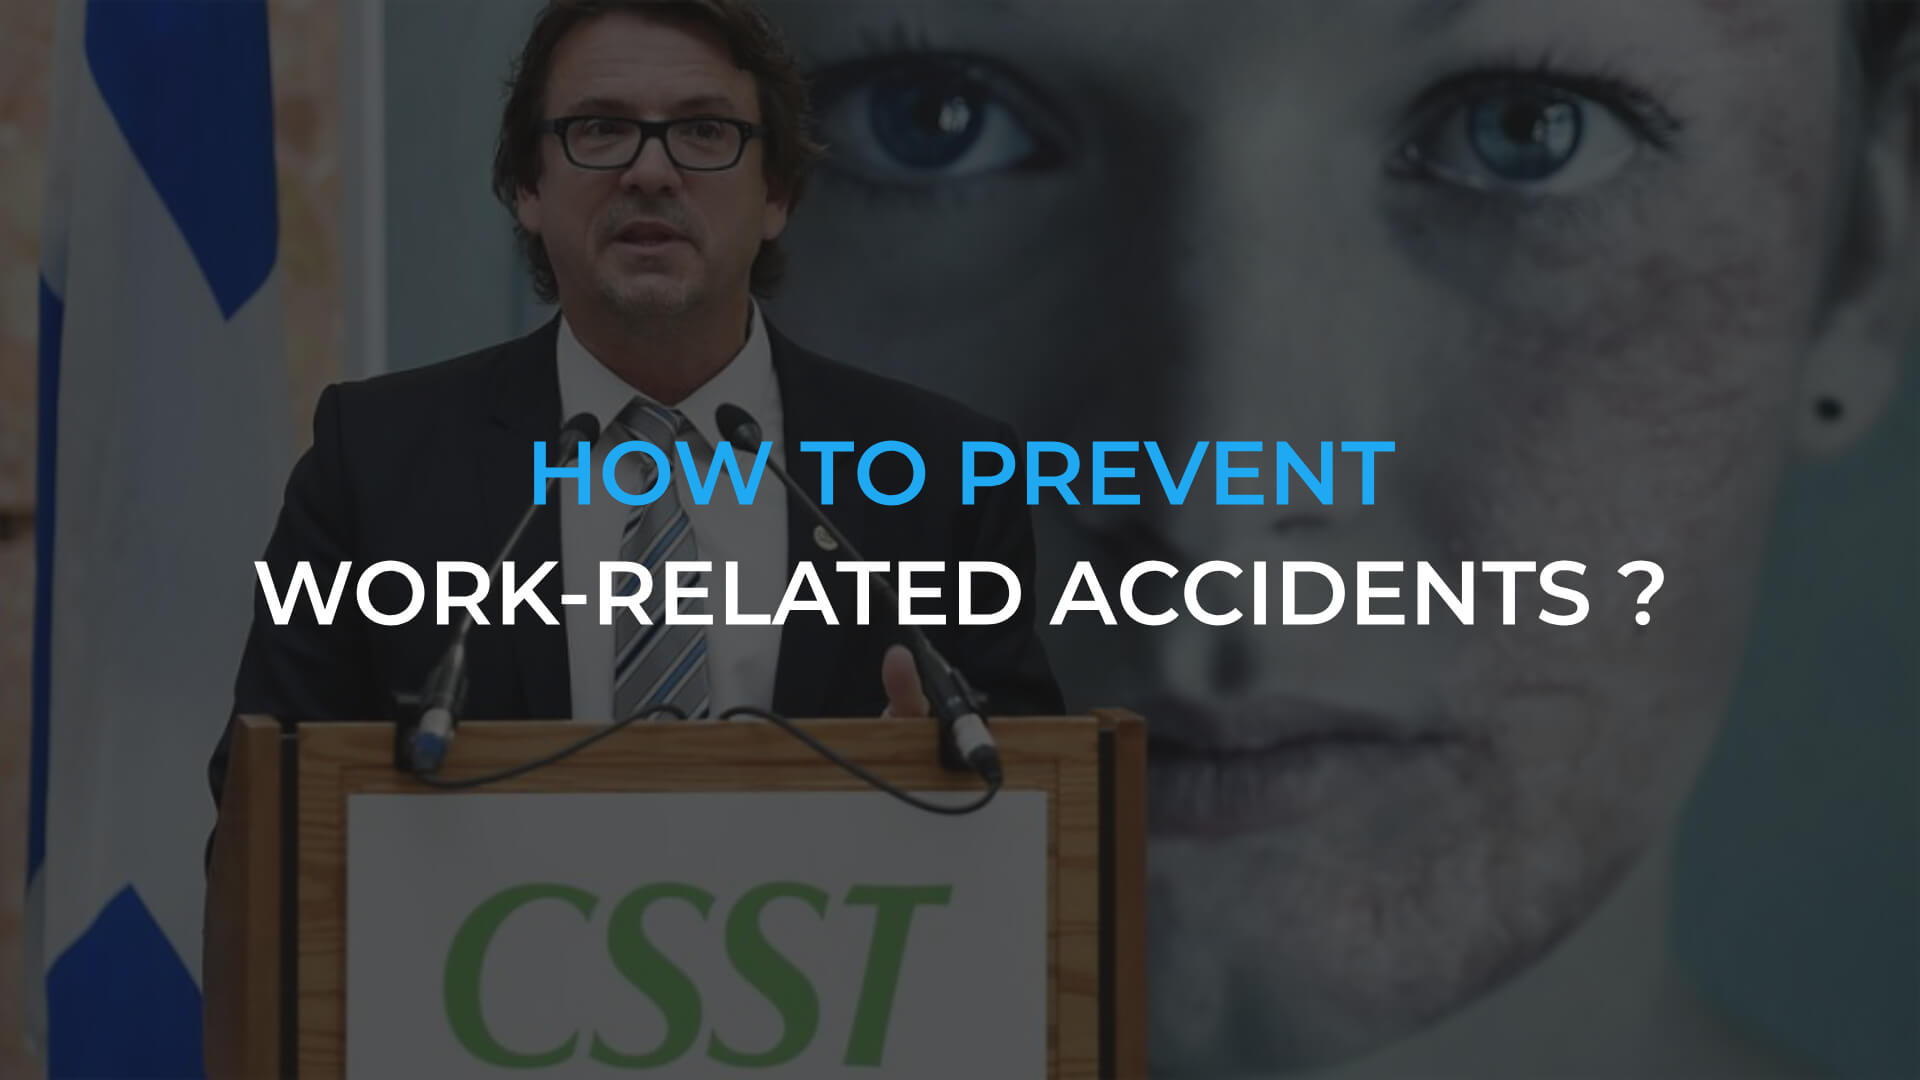 How to prevent work-related accidents with digital dynamic display?